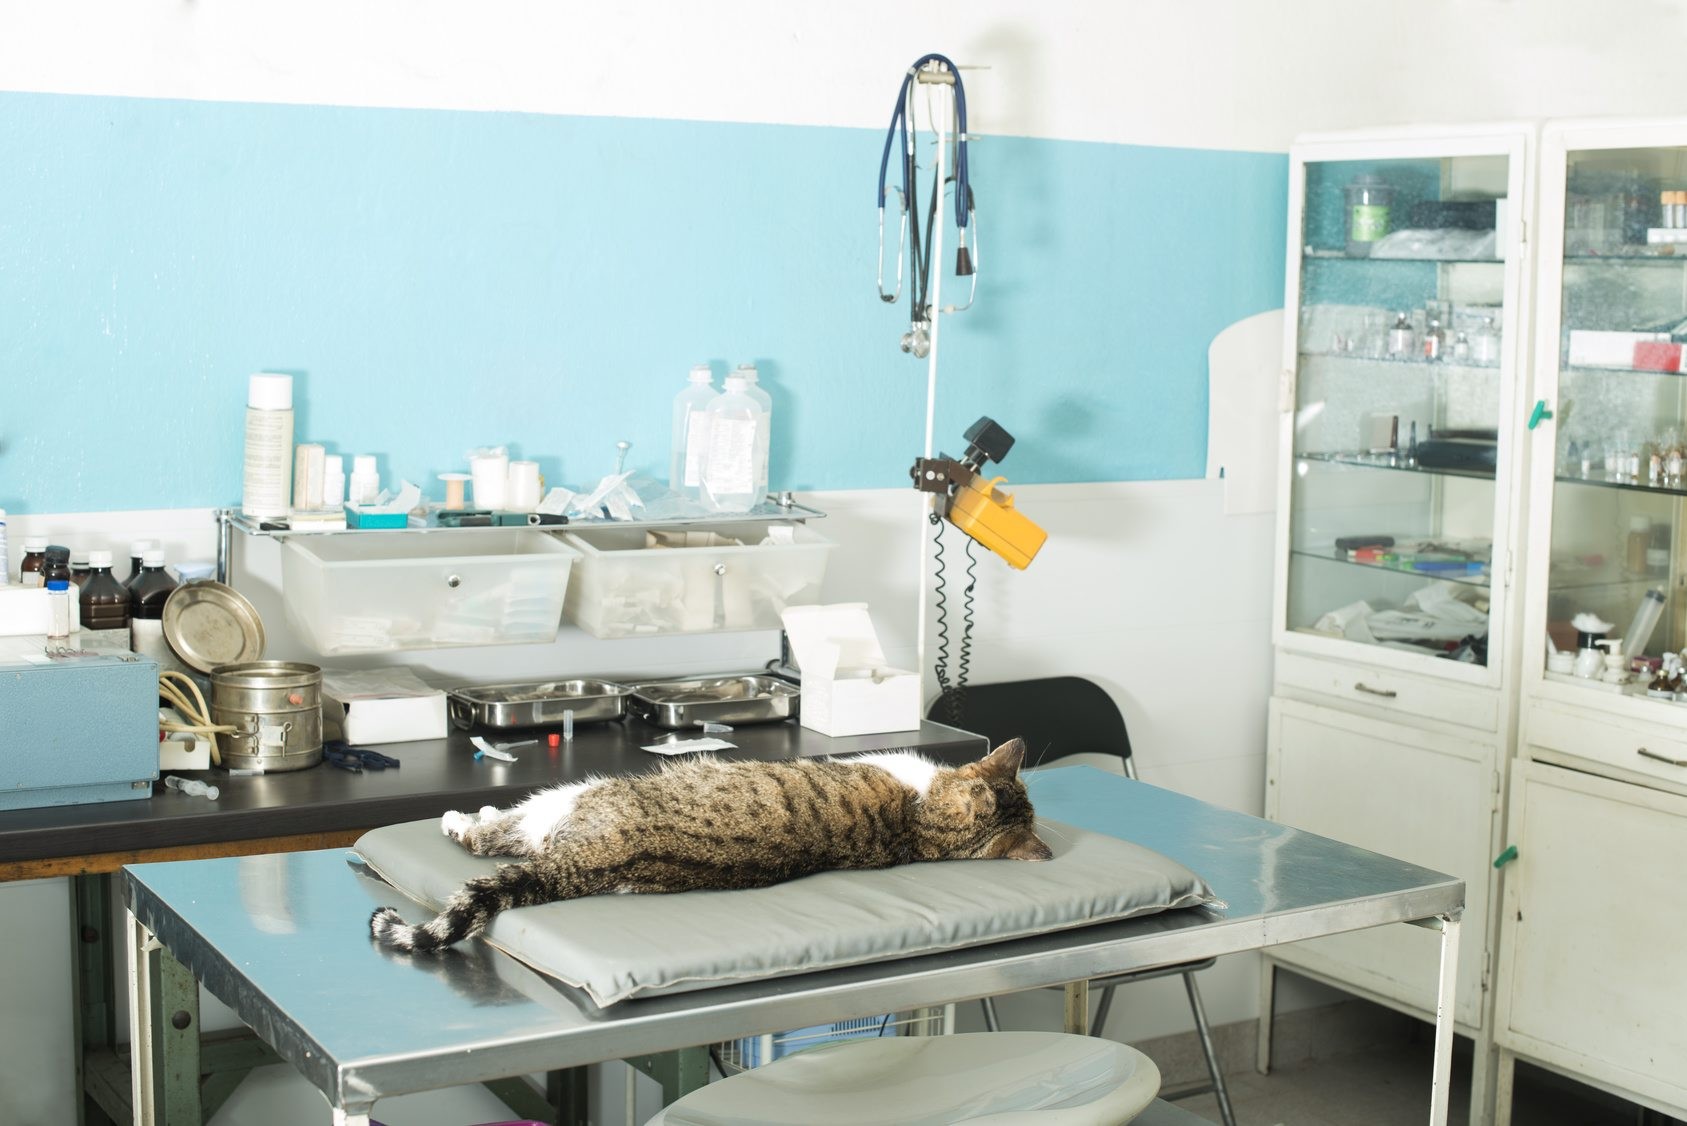 Cat anesthesia in veterinary. Cat anesthesia in veterinary